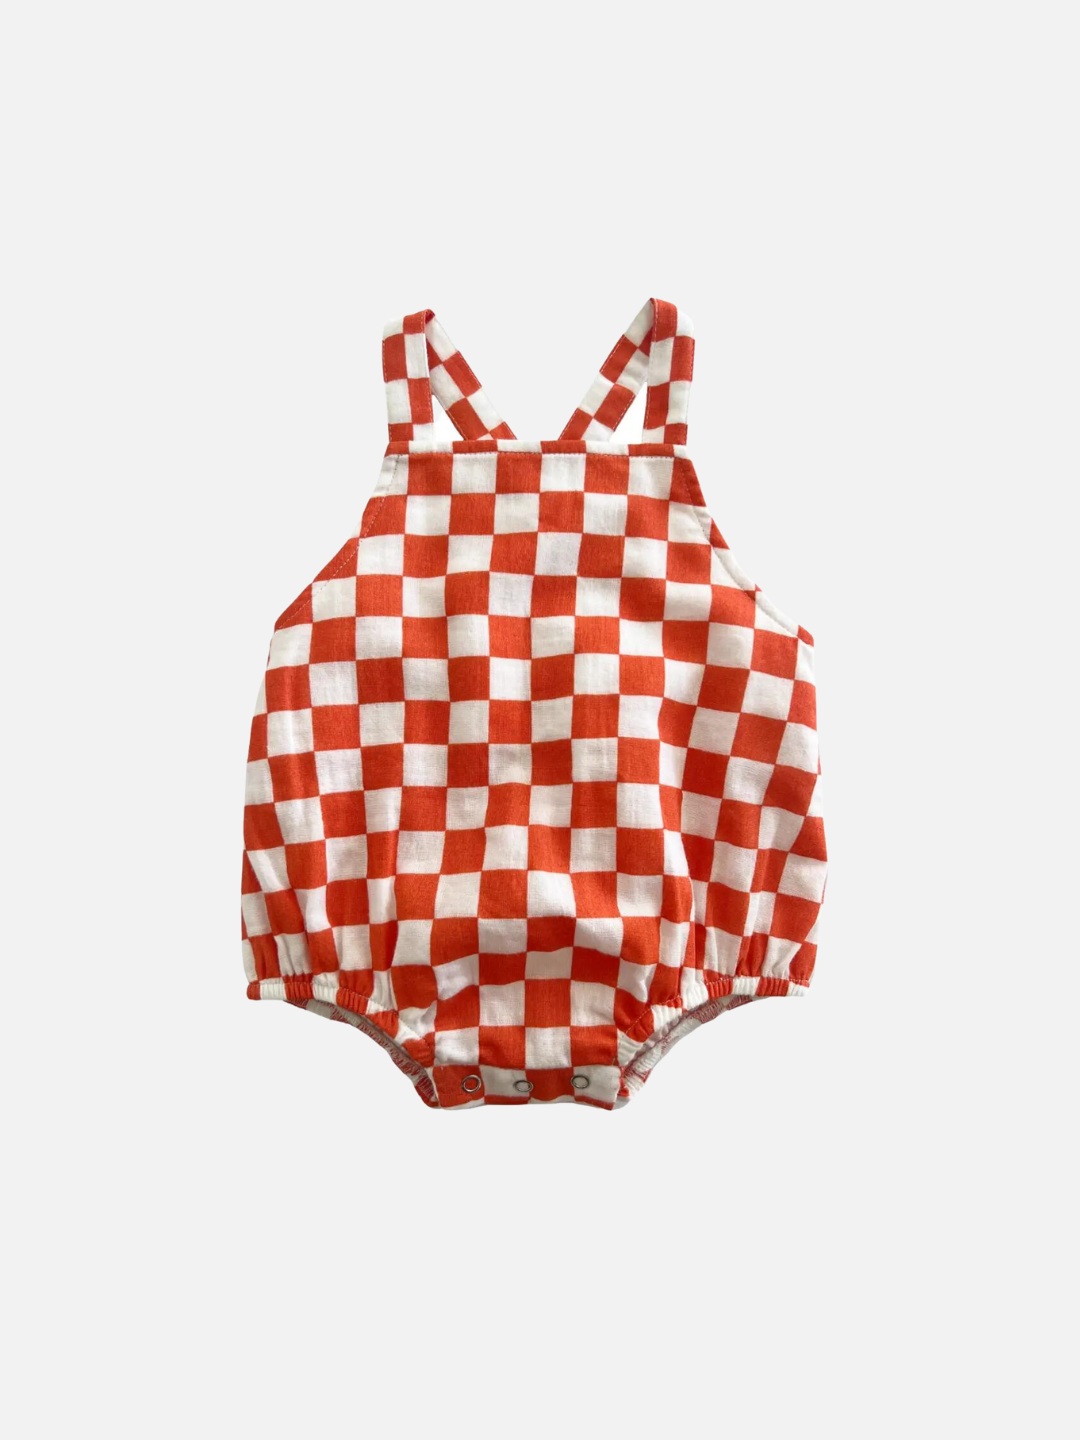 A tangerine orange and white checkerboard kids' sunsuit, front view